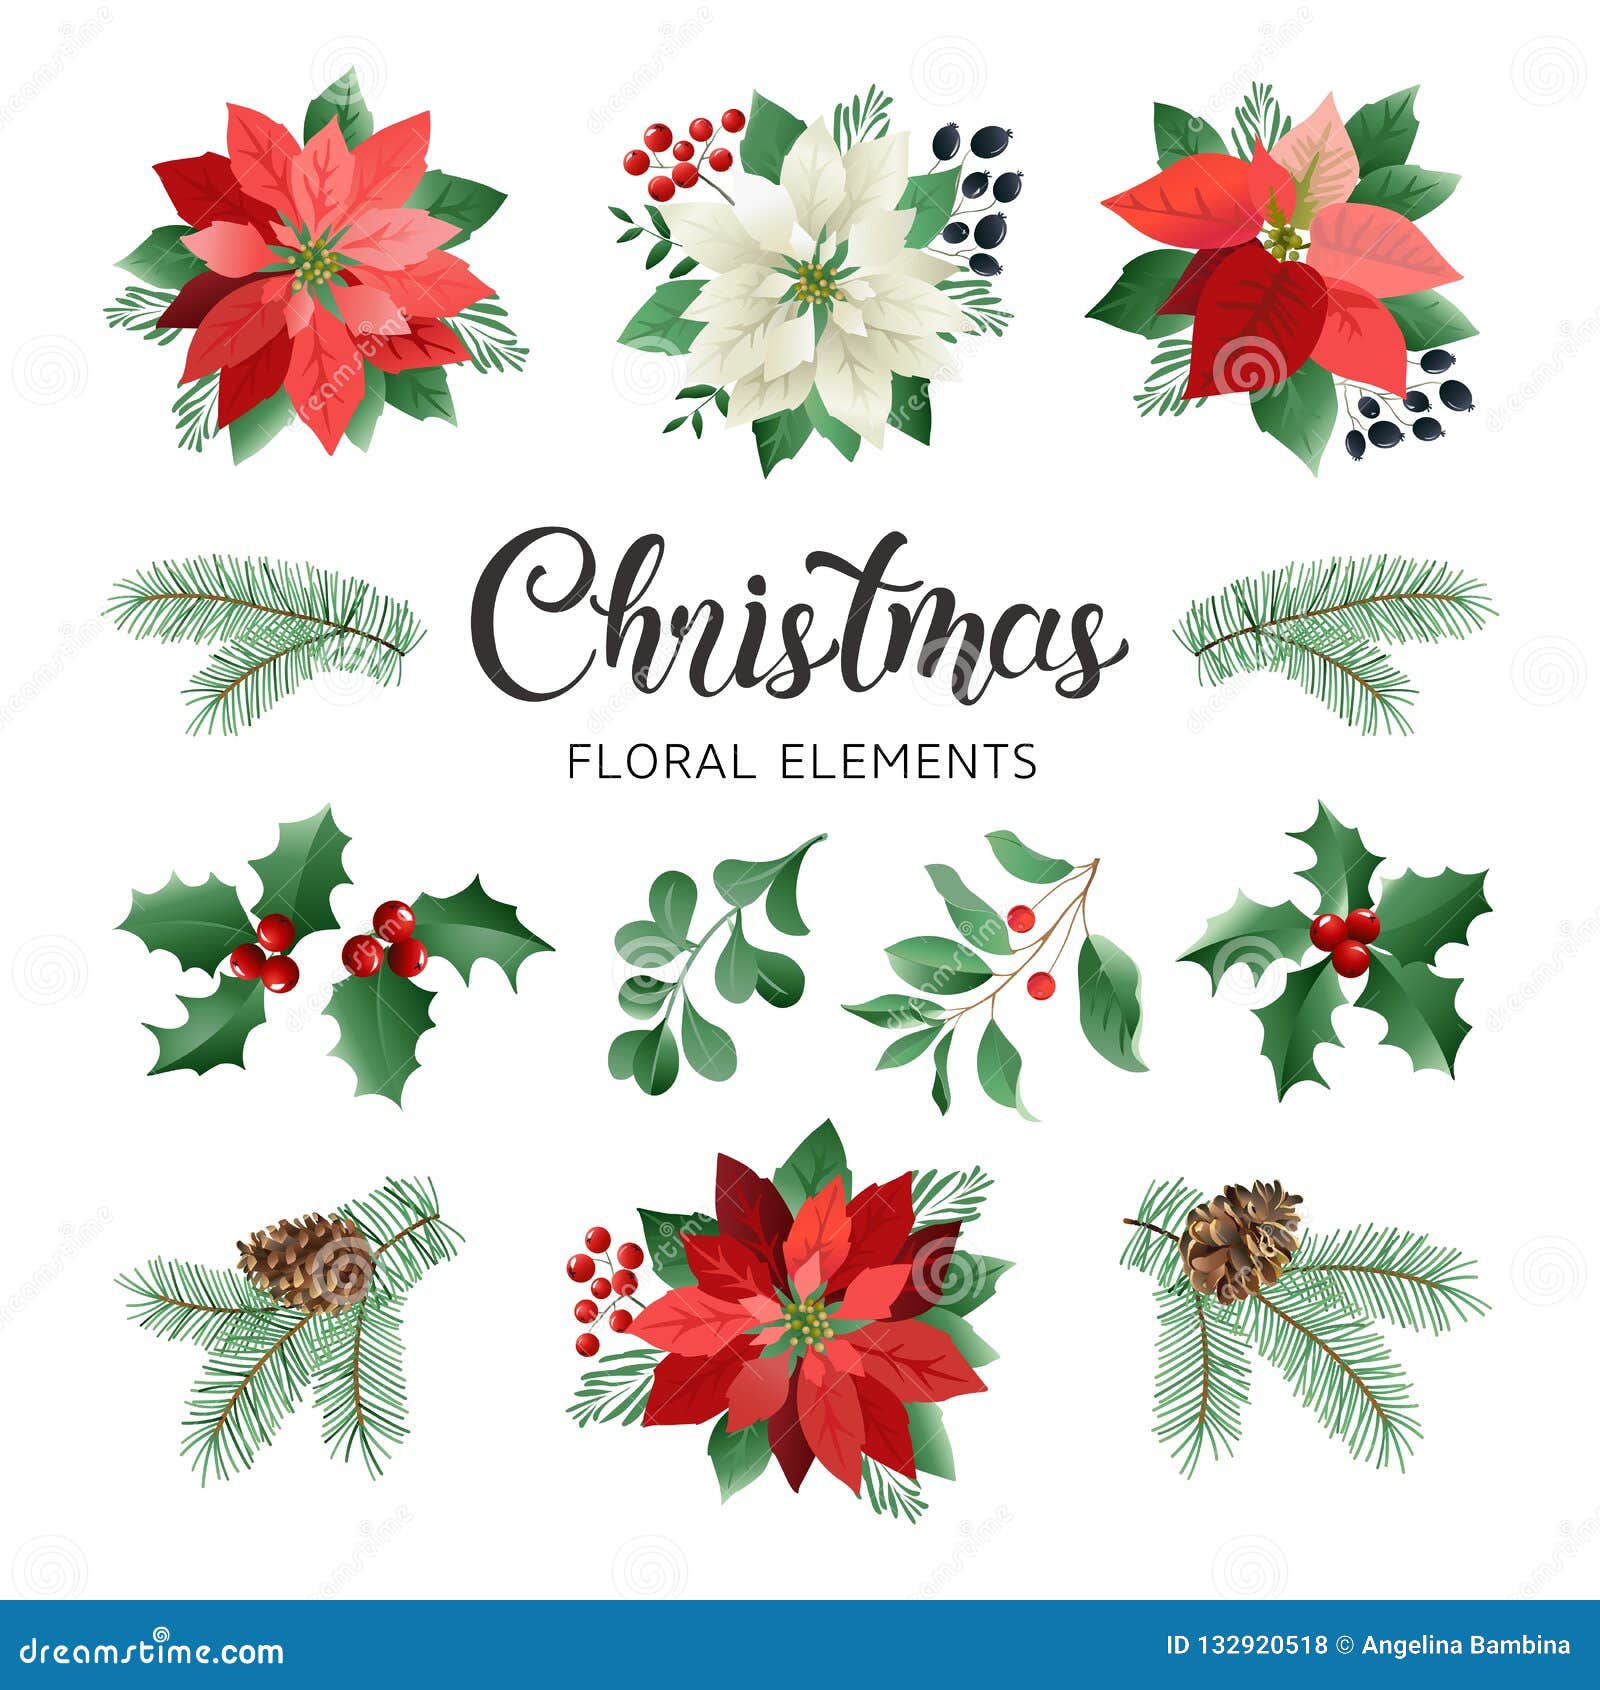 poinsettia flowers and christmas floral s in watercolor style .